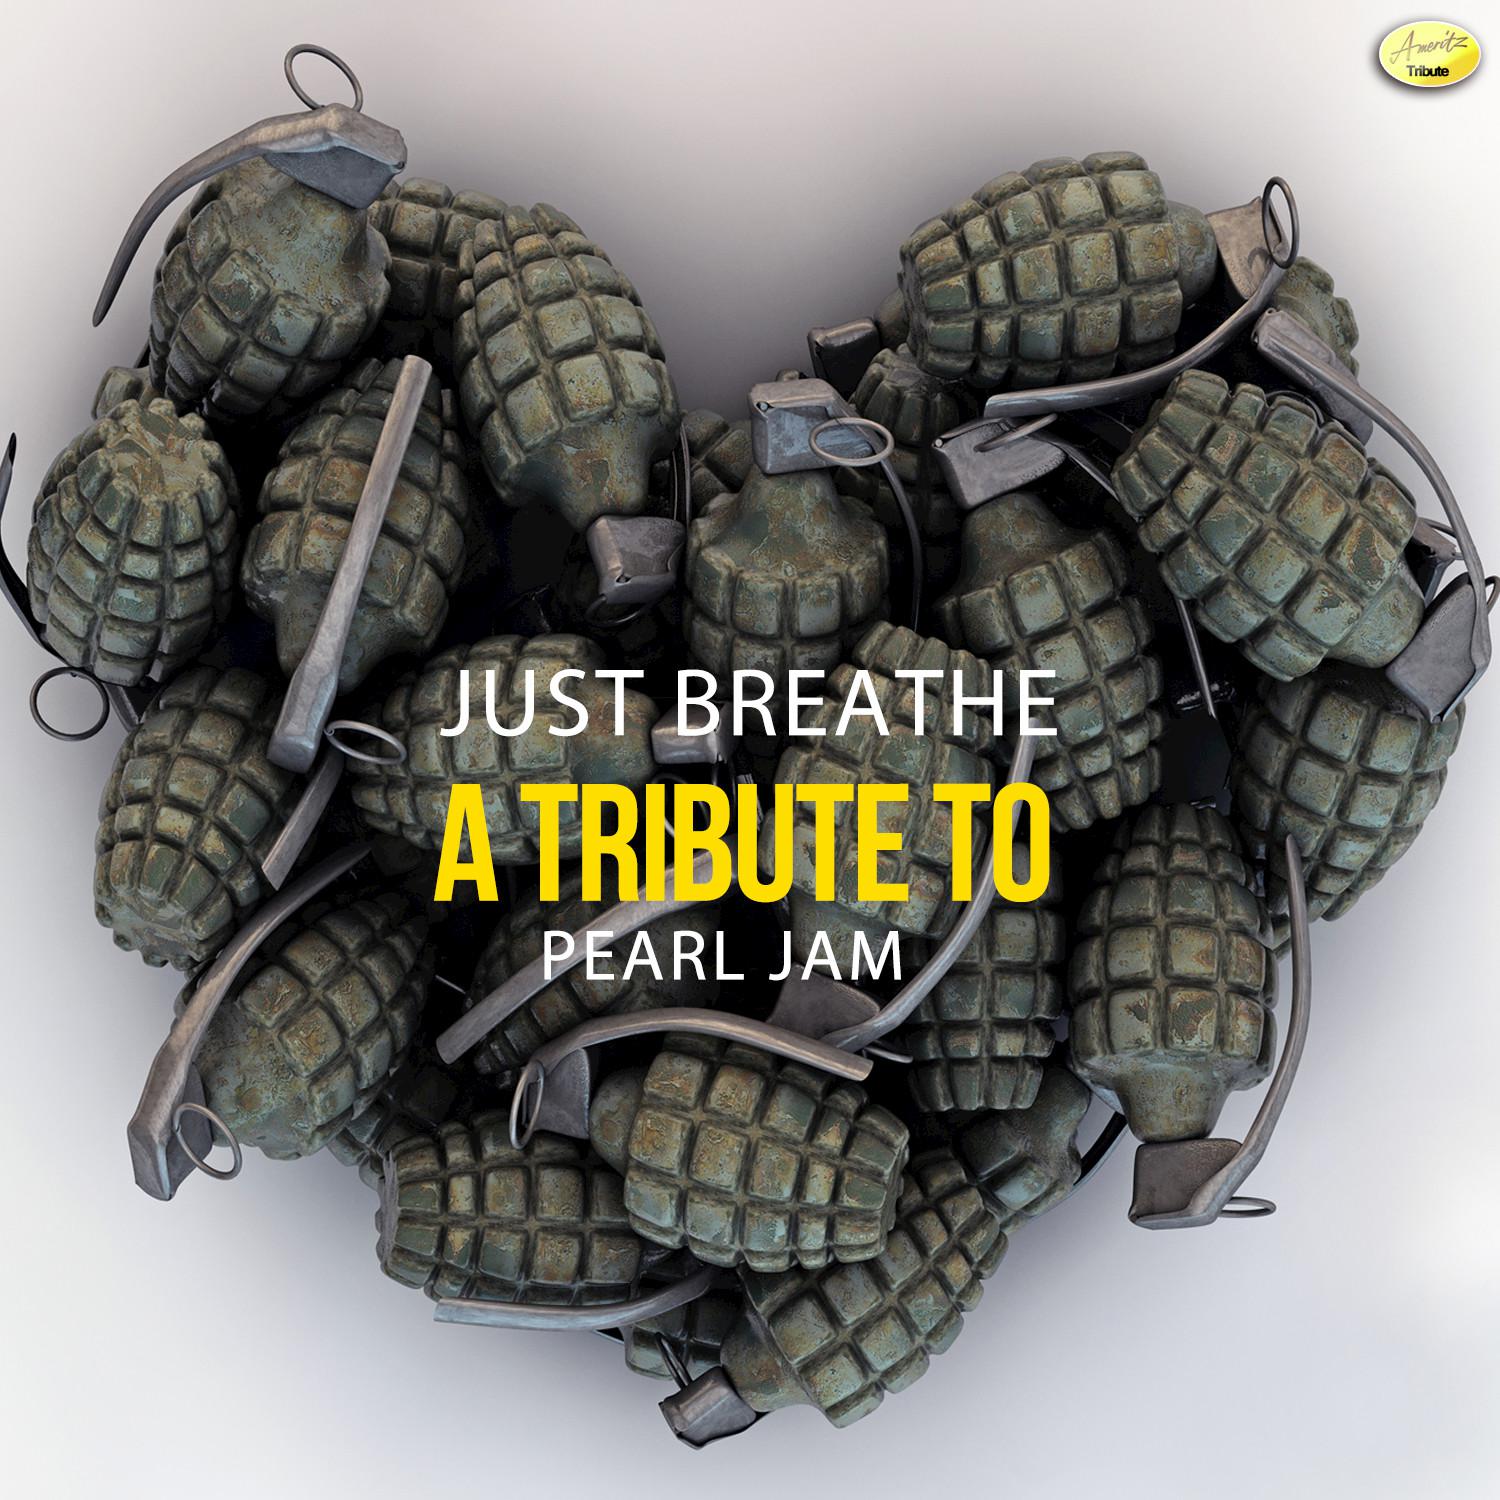 Just Breathe - A Tribute to Pearl Jam